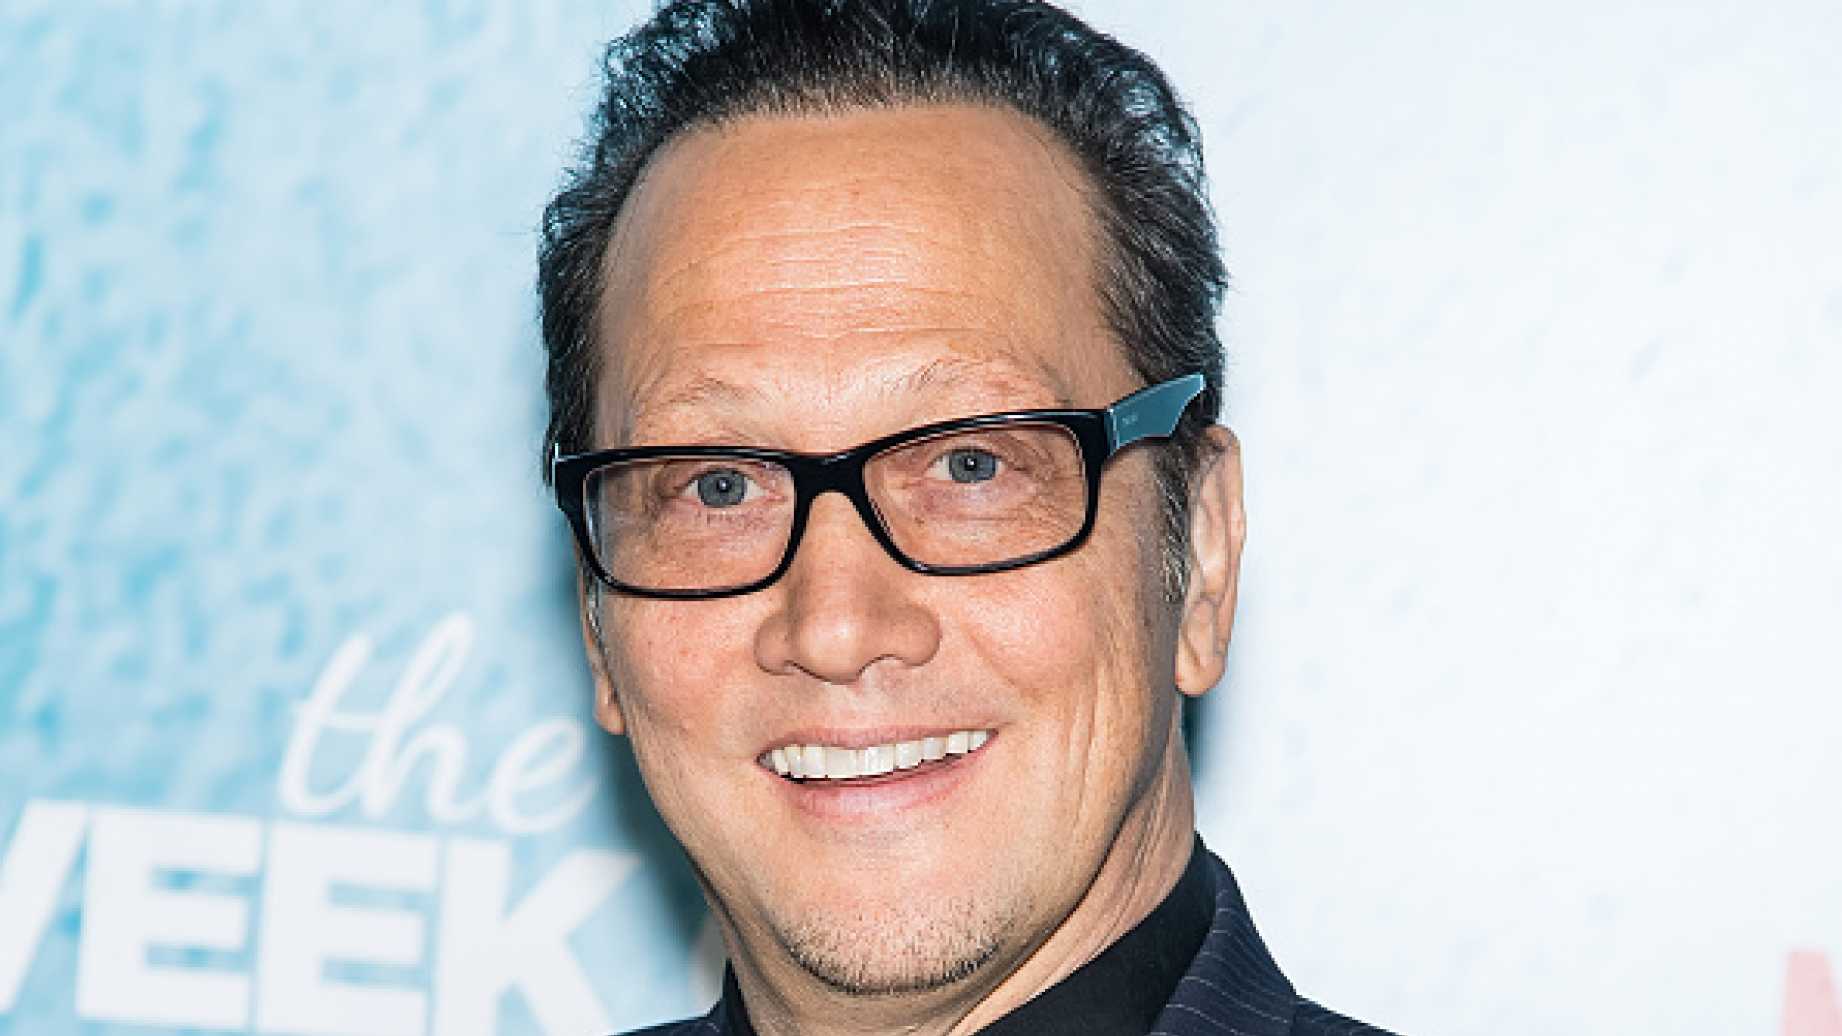 Image: Rob Schneider strikes back against the destructive “comedy” of left-wing politics (which is really just a HATE parade)